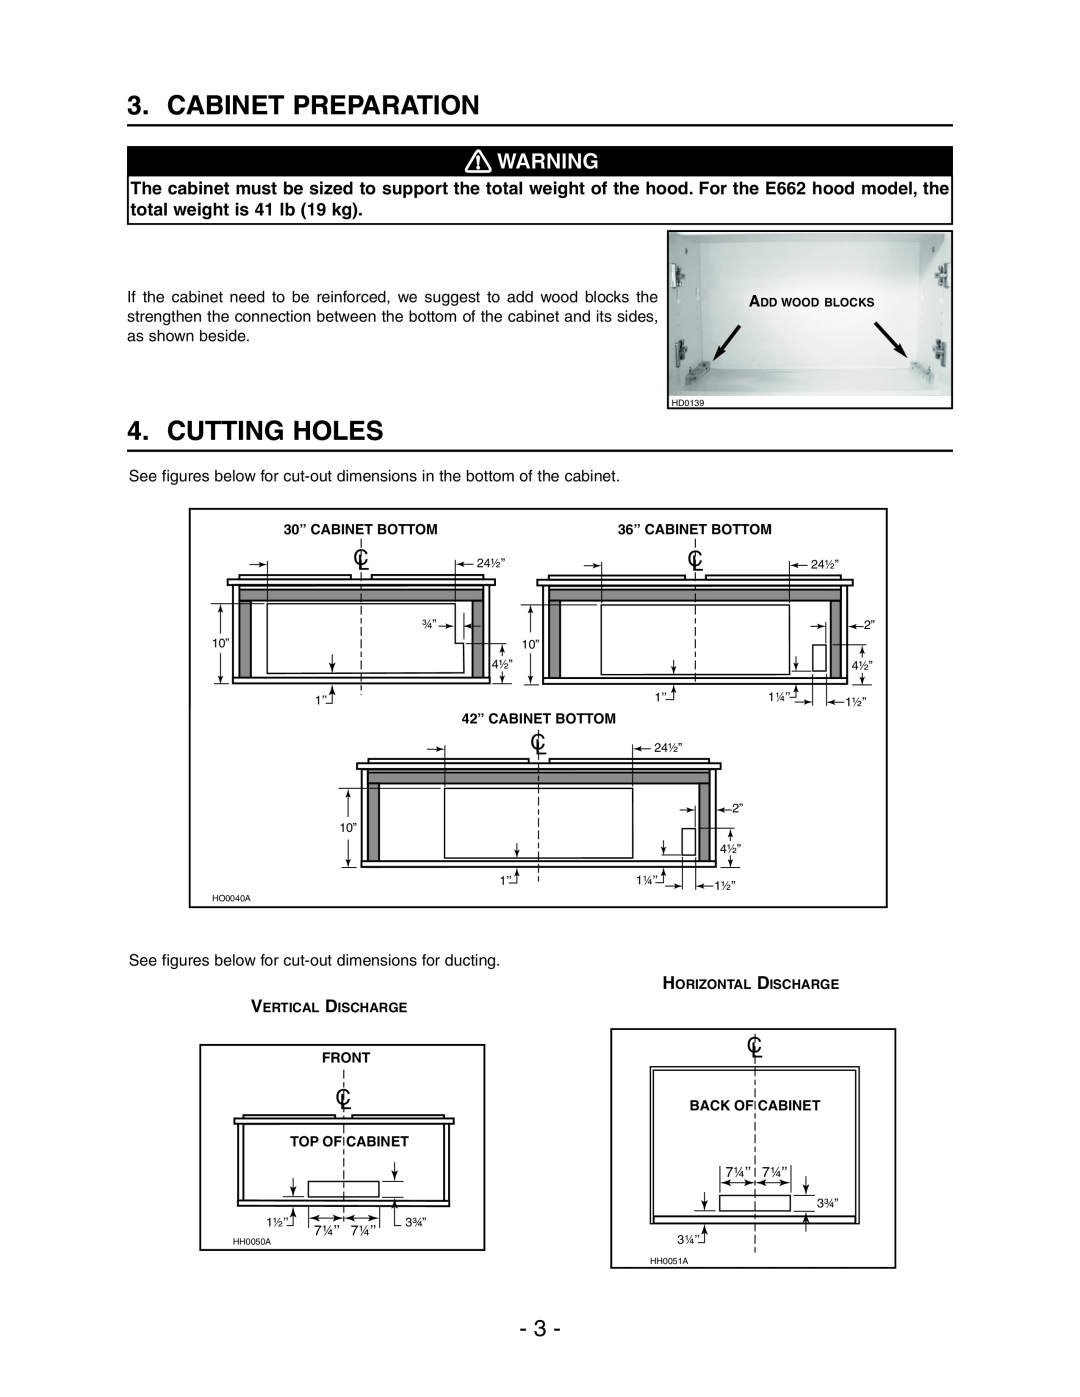 Broan Model E662 installation instructions Cabinet Preparation, Cutting Holes 